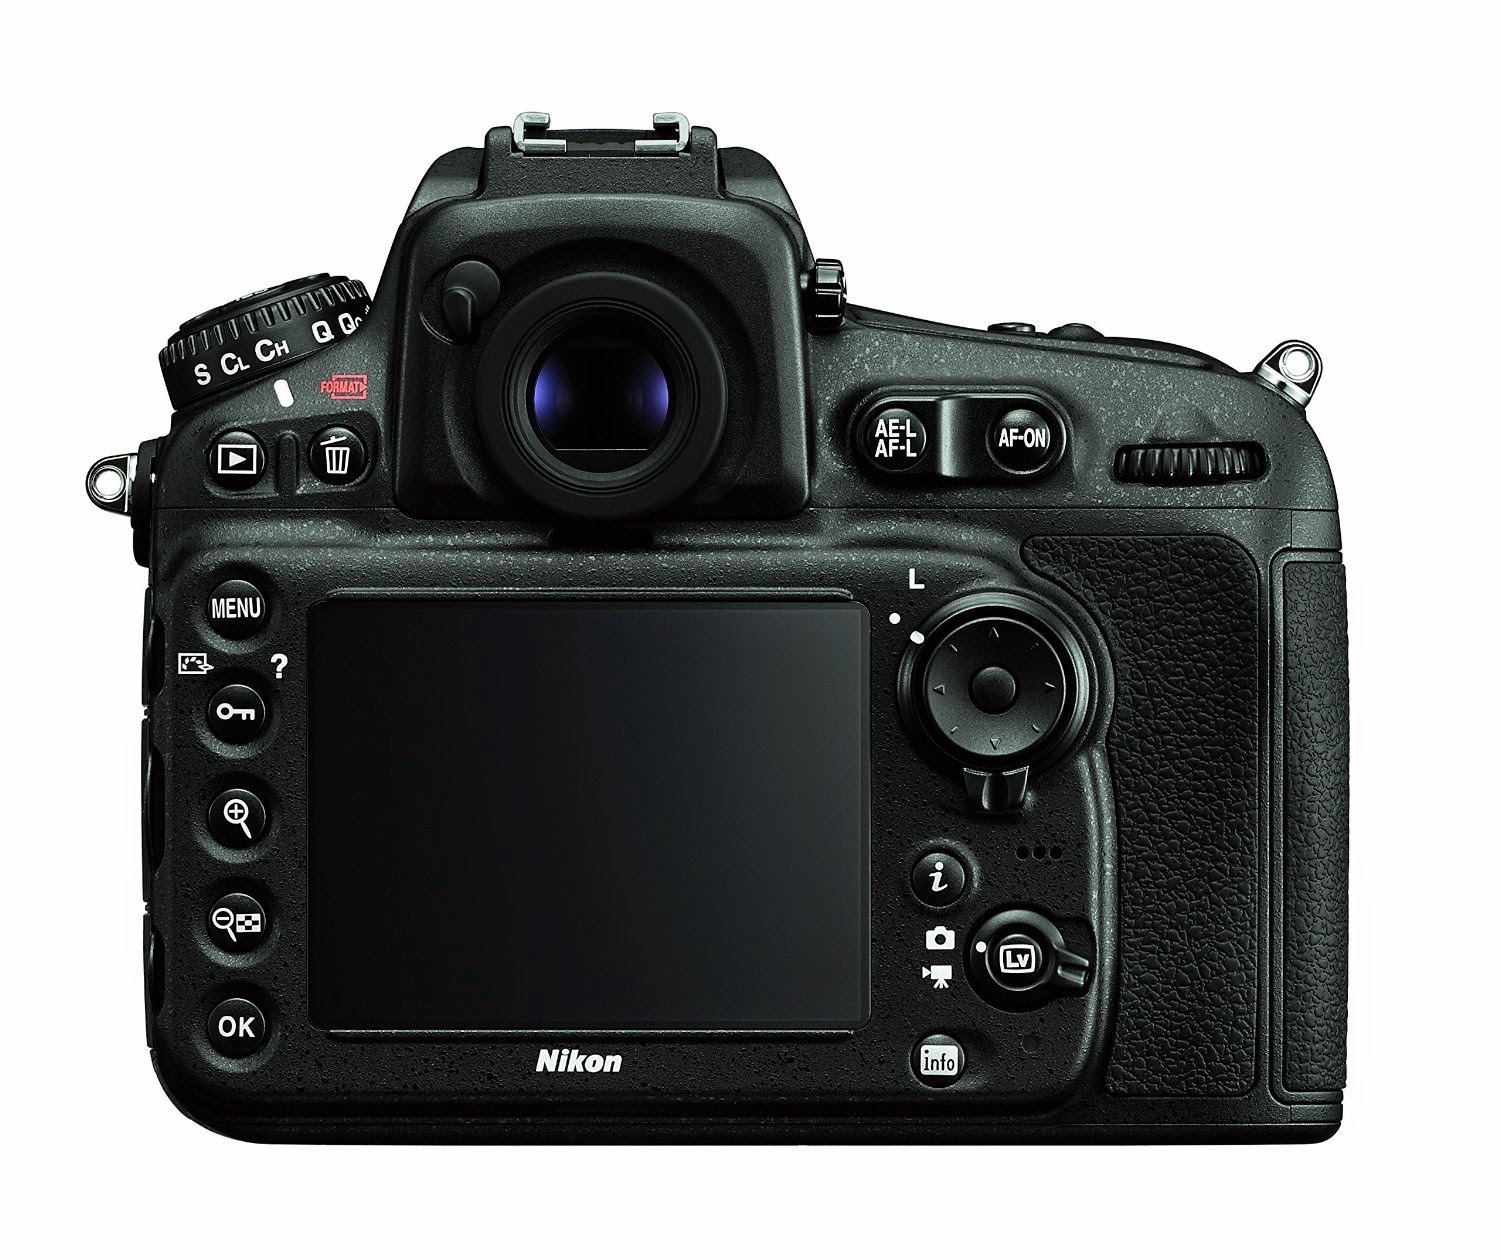 Nikon D810 FX-format Digital SLR Camera, rear view with LCD screen, viewfinder, function buttons